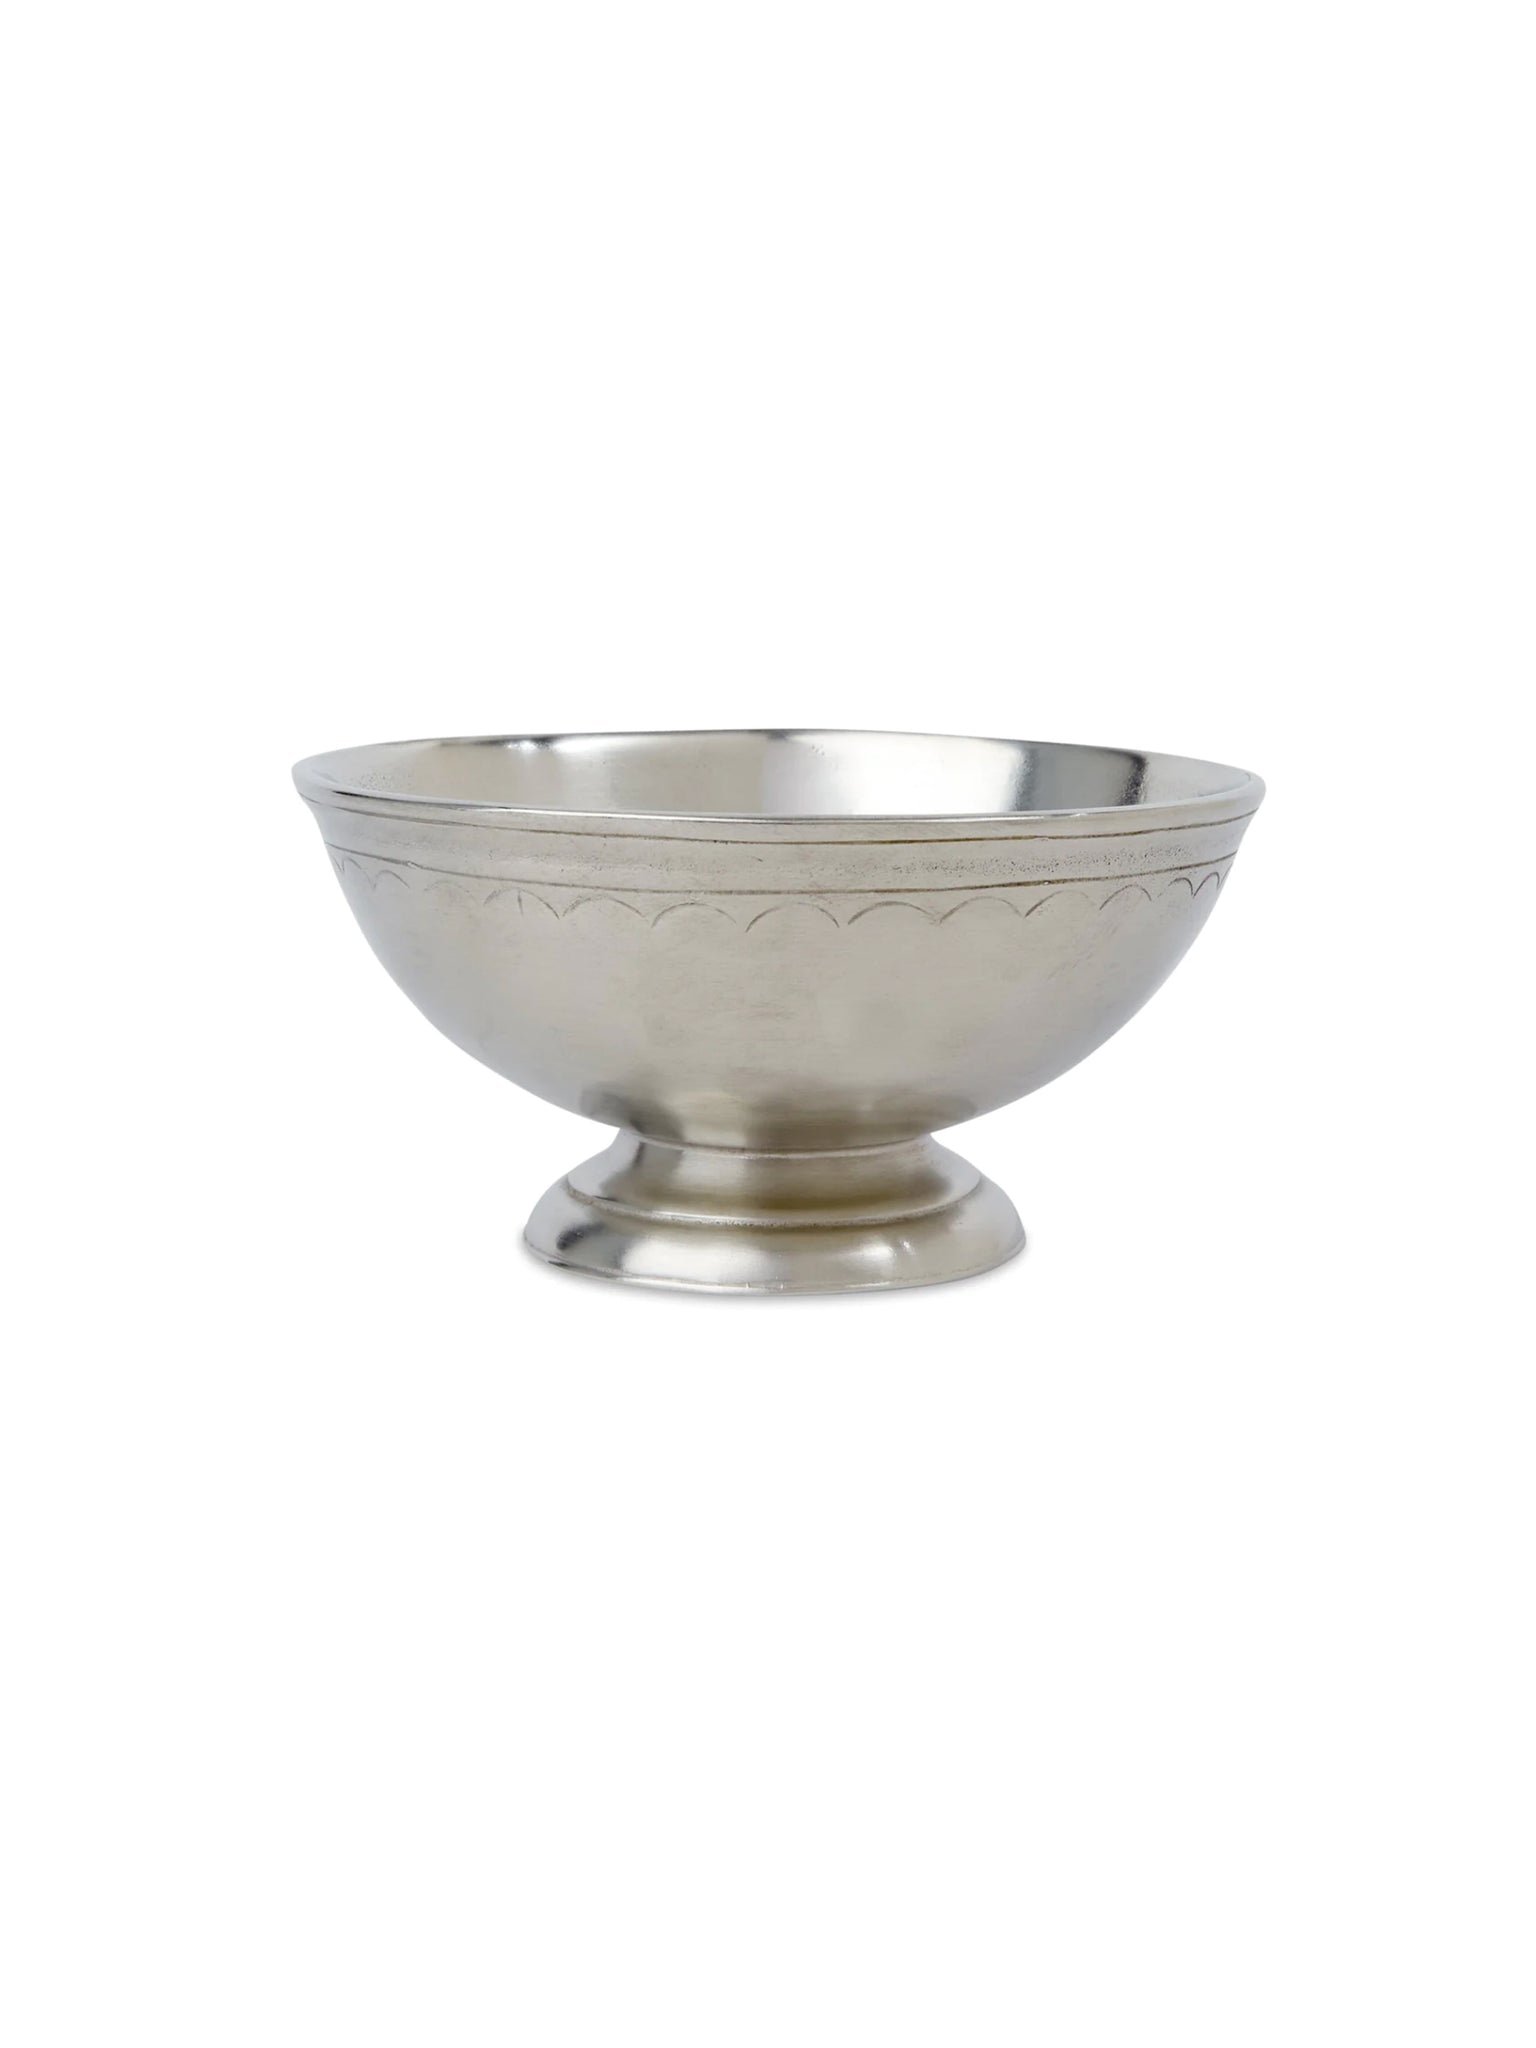 MATCH Pewter Small Footed Bowl Weston Table